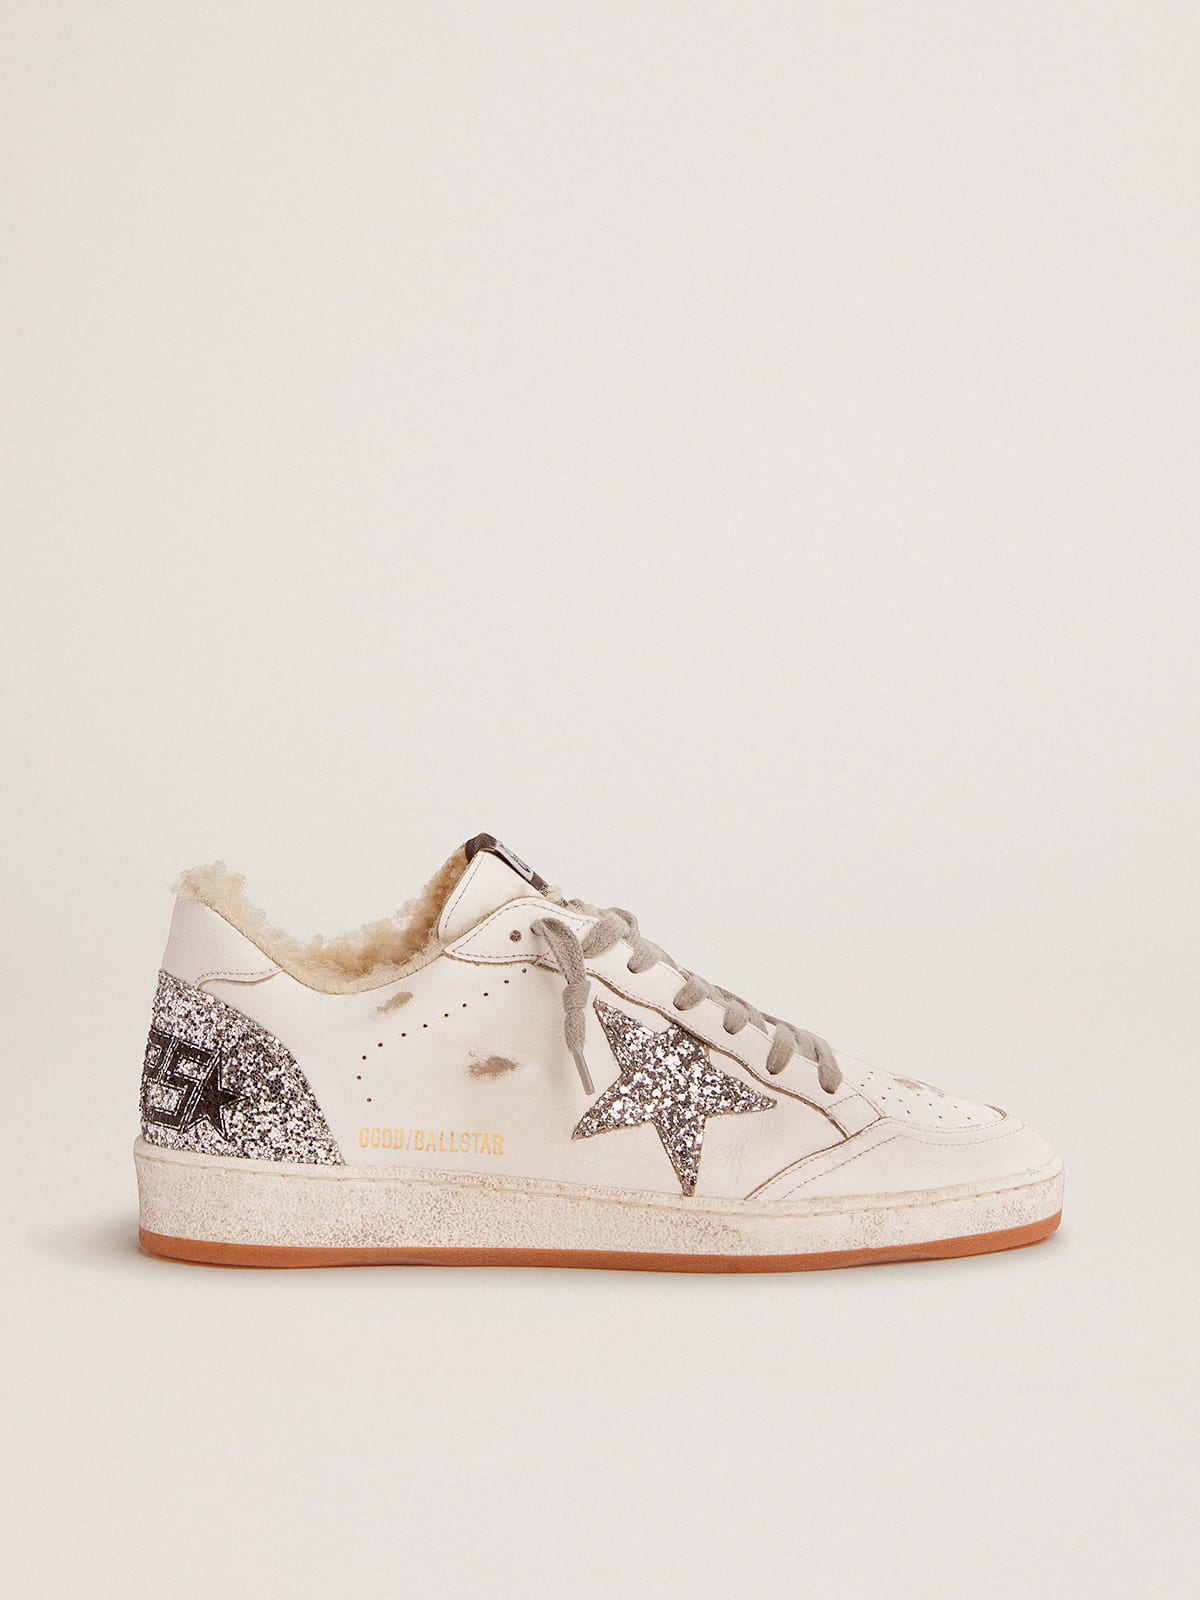 Ball Star sneakers in leather with glitter details and shearling lining ...